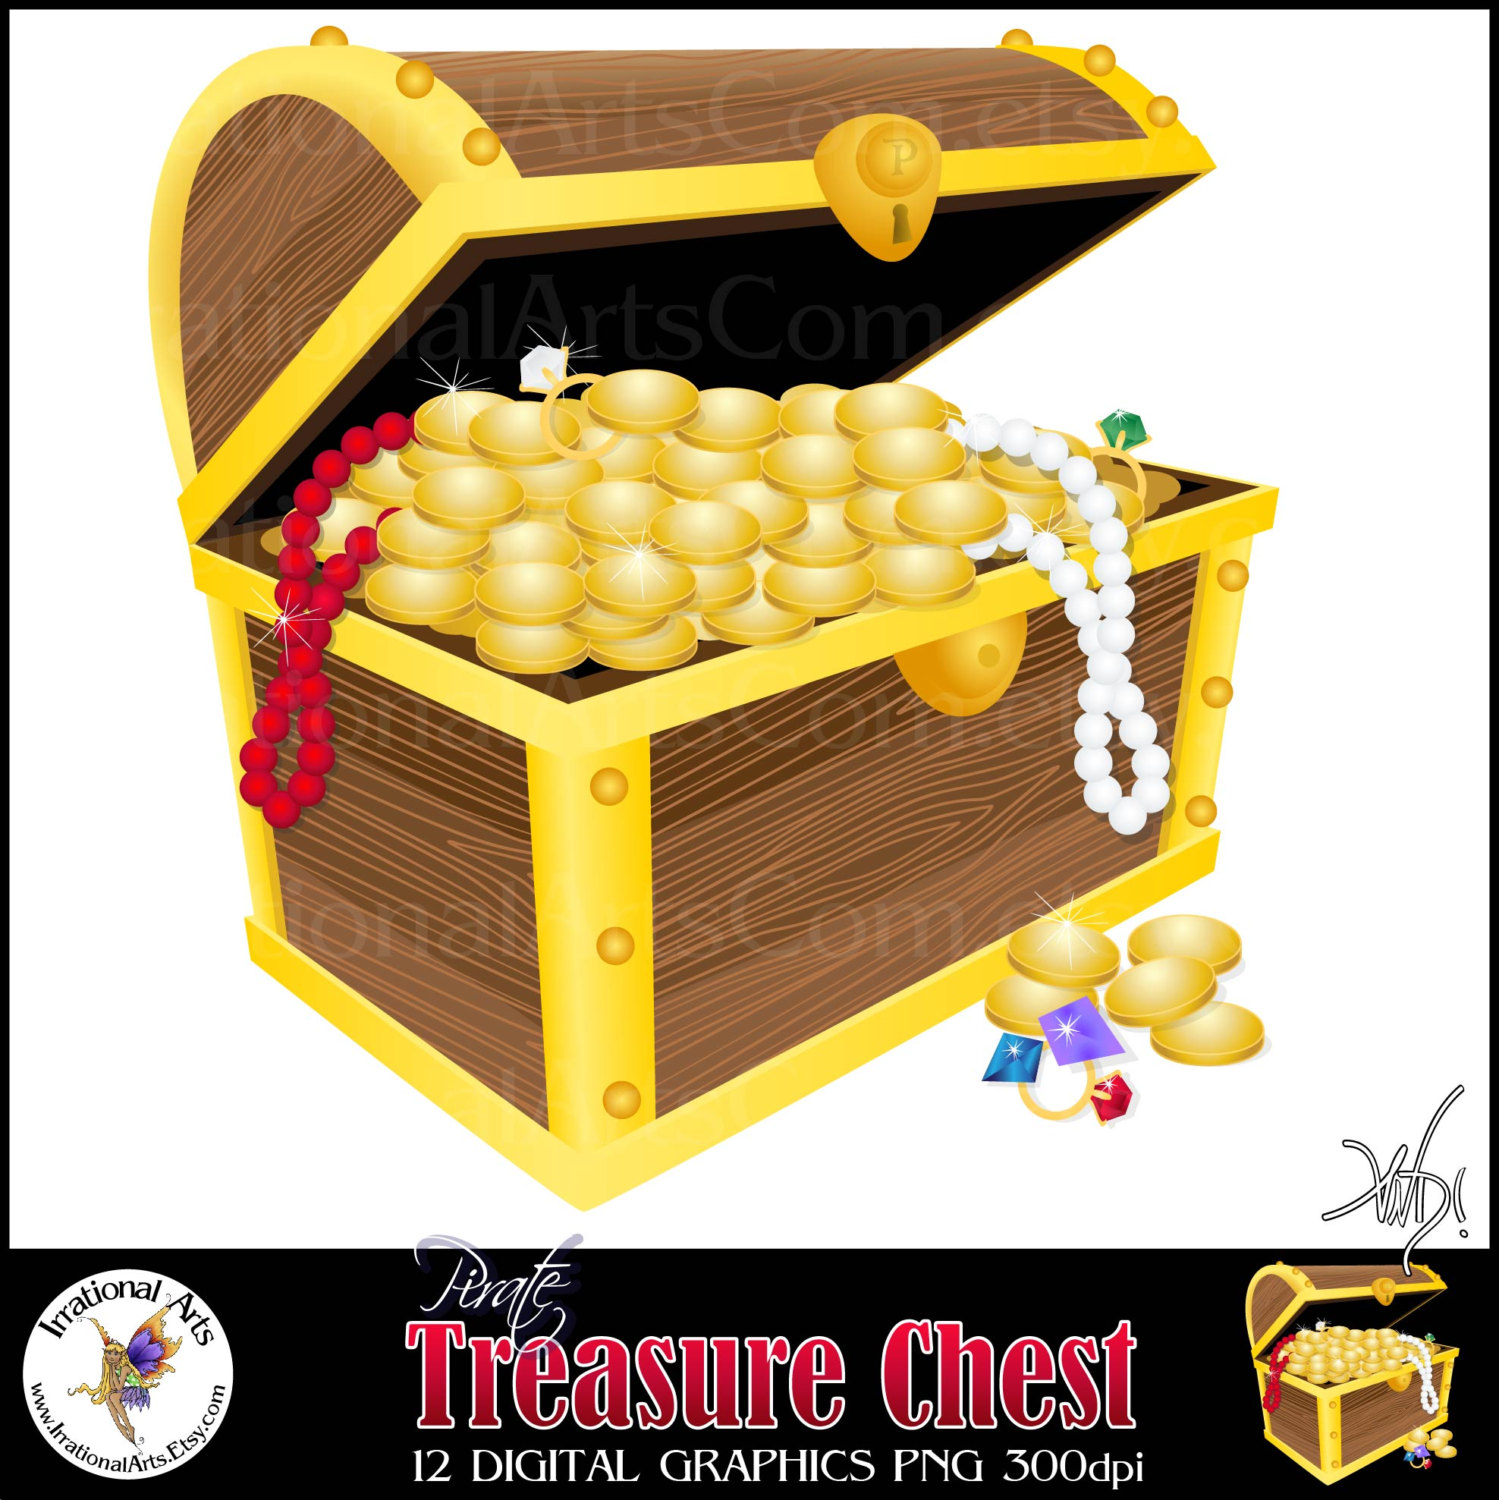 Pirate Treasure Chest Digital Clipart Graphics By Irrationalarts